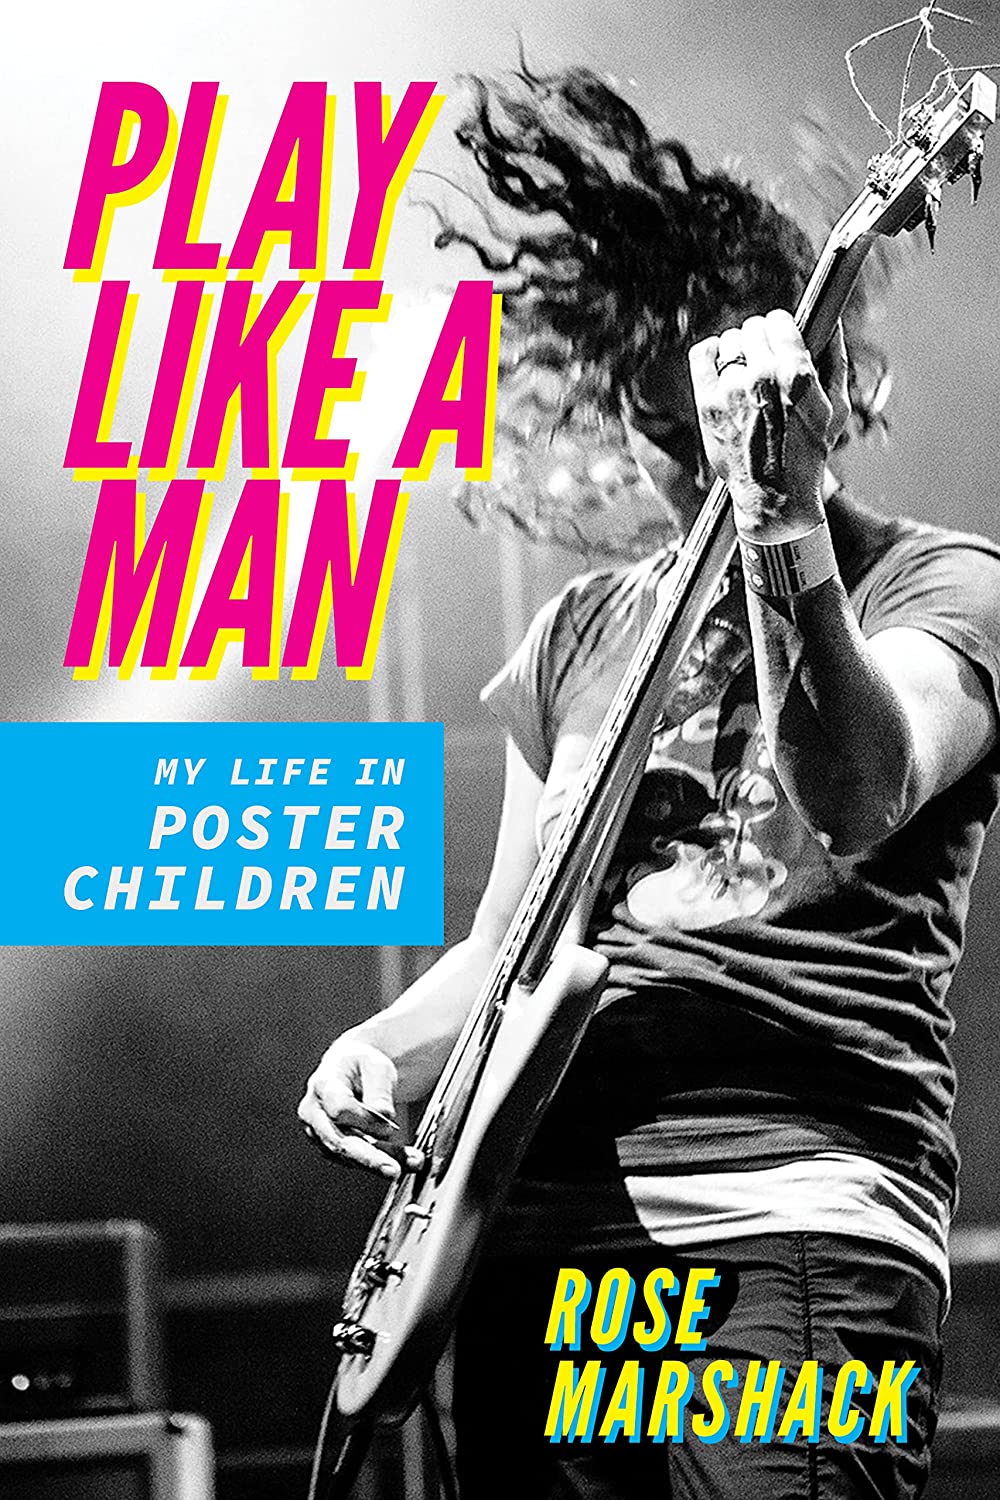 ROSE MARSHACK - PLAY LIKE A MAN: MY LIFE IN POSTER CHILDREN - PAPERBACK - BOOK